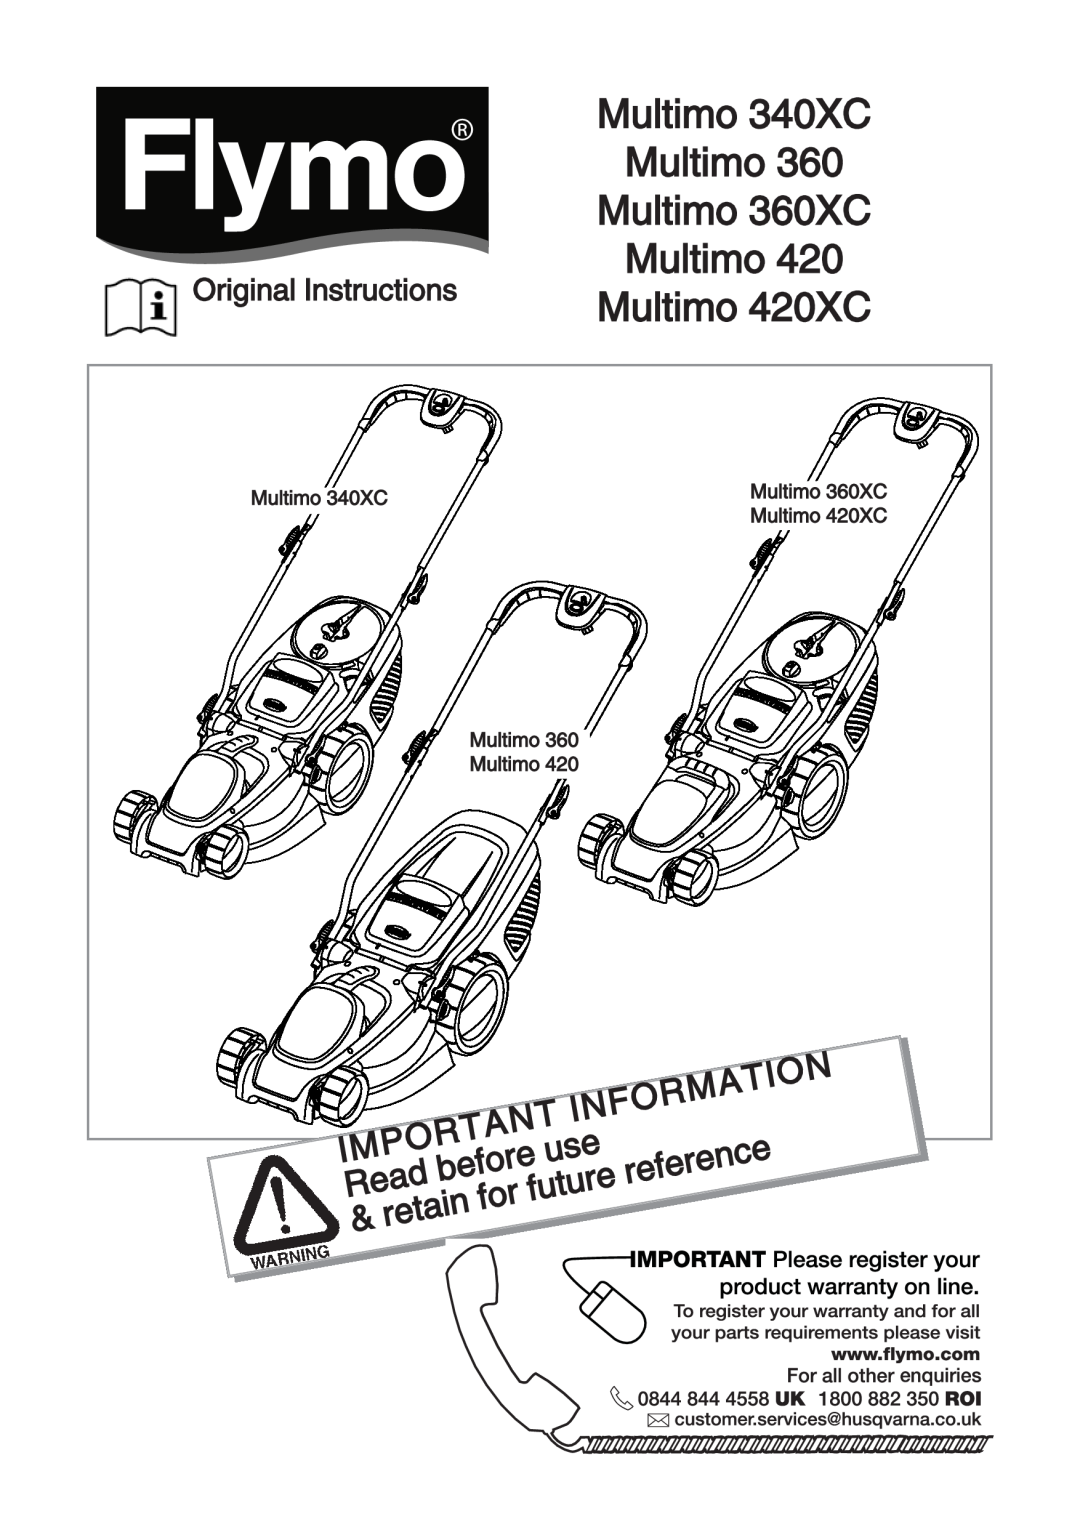 Flymo 360 manual Information, IMPORTANTuse, Read, before, reference, future, retain, Original Instructions, Multimo 340XC 